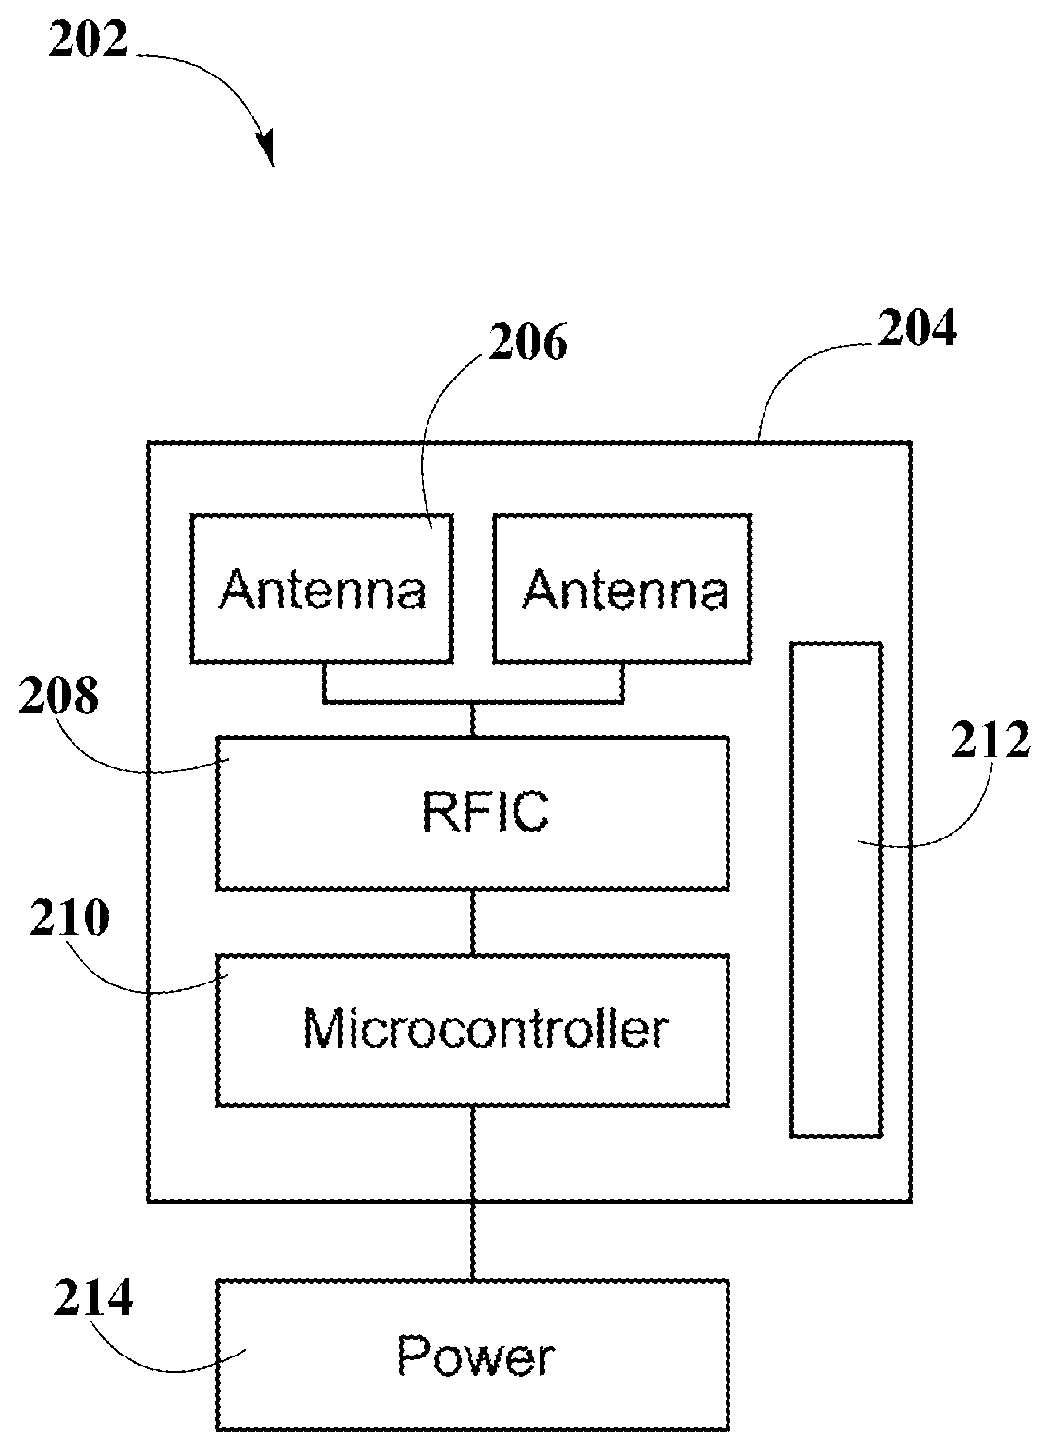 Systems and Methods for Automatically Testing the Communication Between Wireless Power Transmitter and Wireless Power Receiver